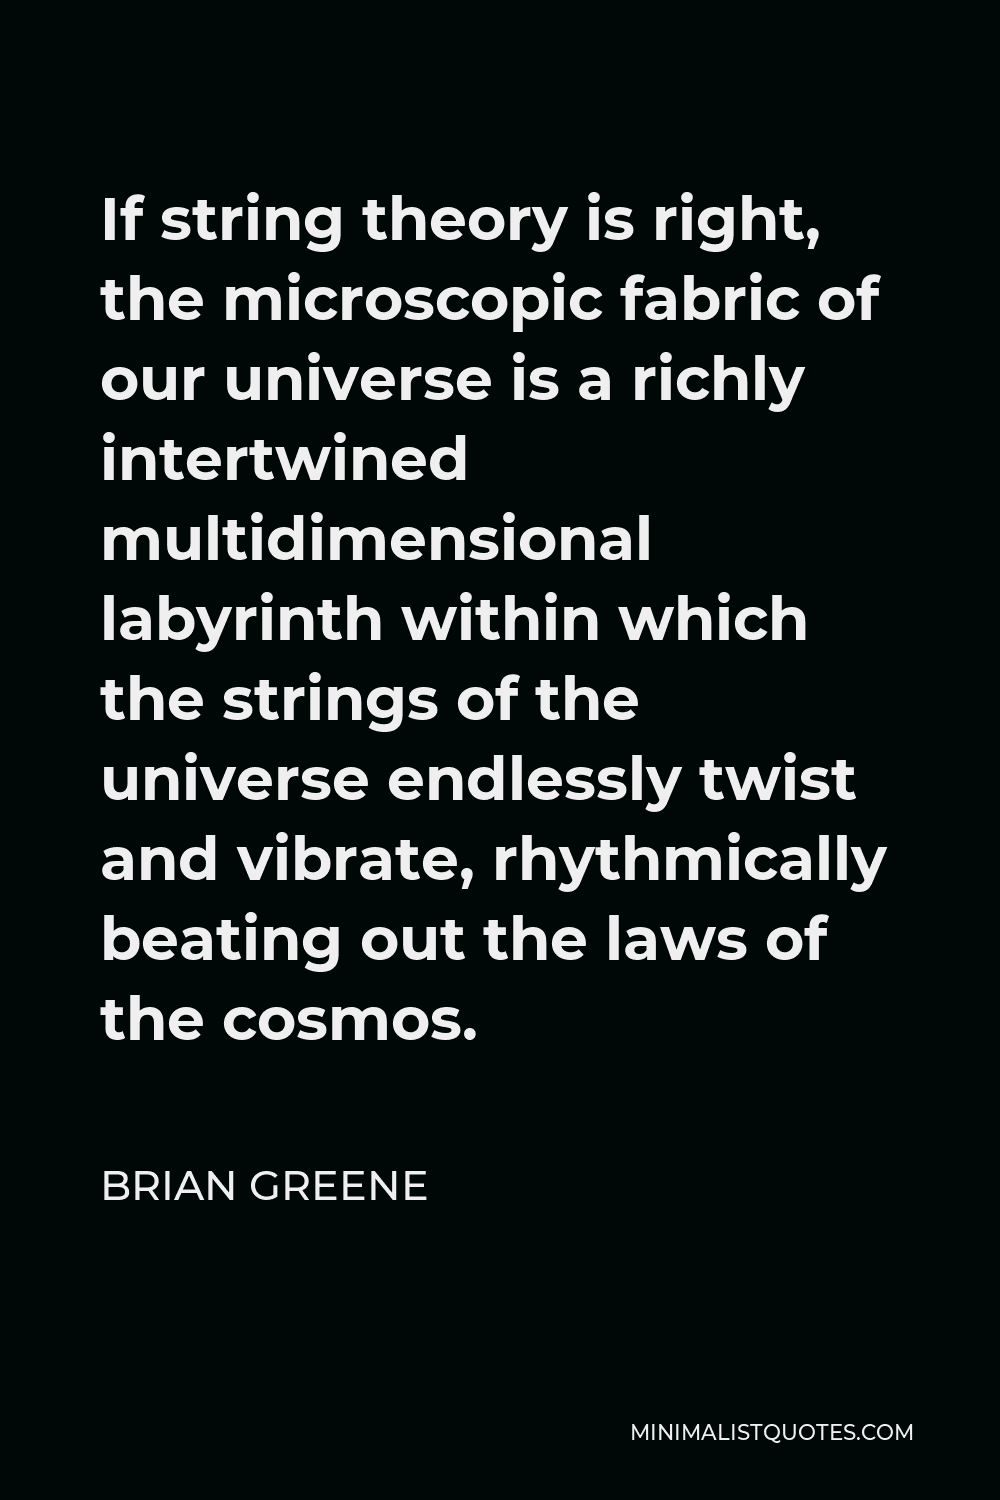 Brian Greene Quote - If string theory is right, the microscopic fabric of our universe is a richly intertwined multidimensional labyrinth within which the strings of the universe endlessly twist and vibrate, rhythmically beating out the laws of the cosmos.